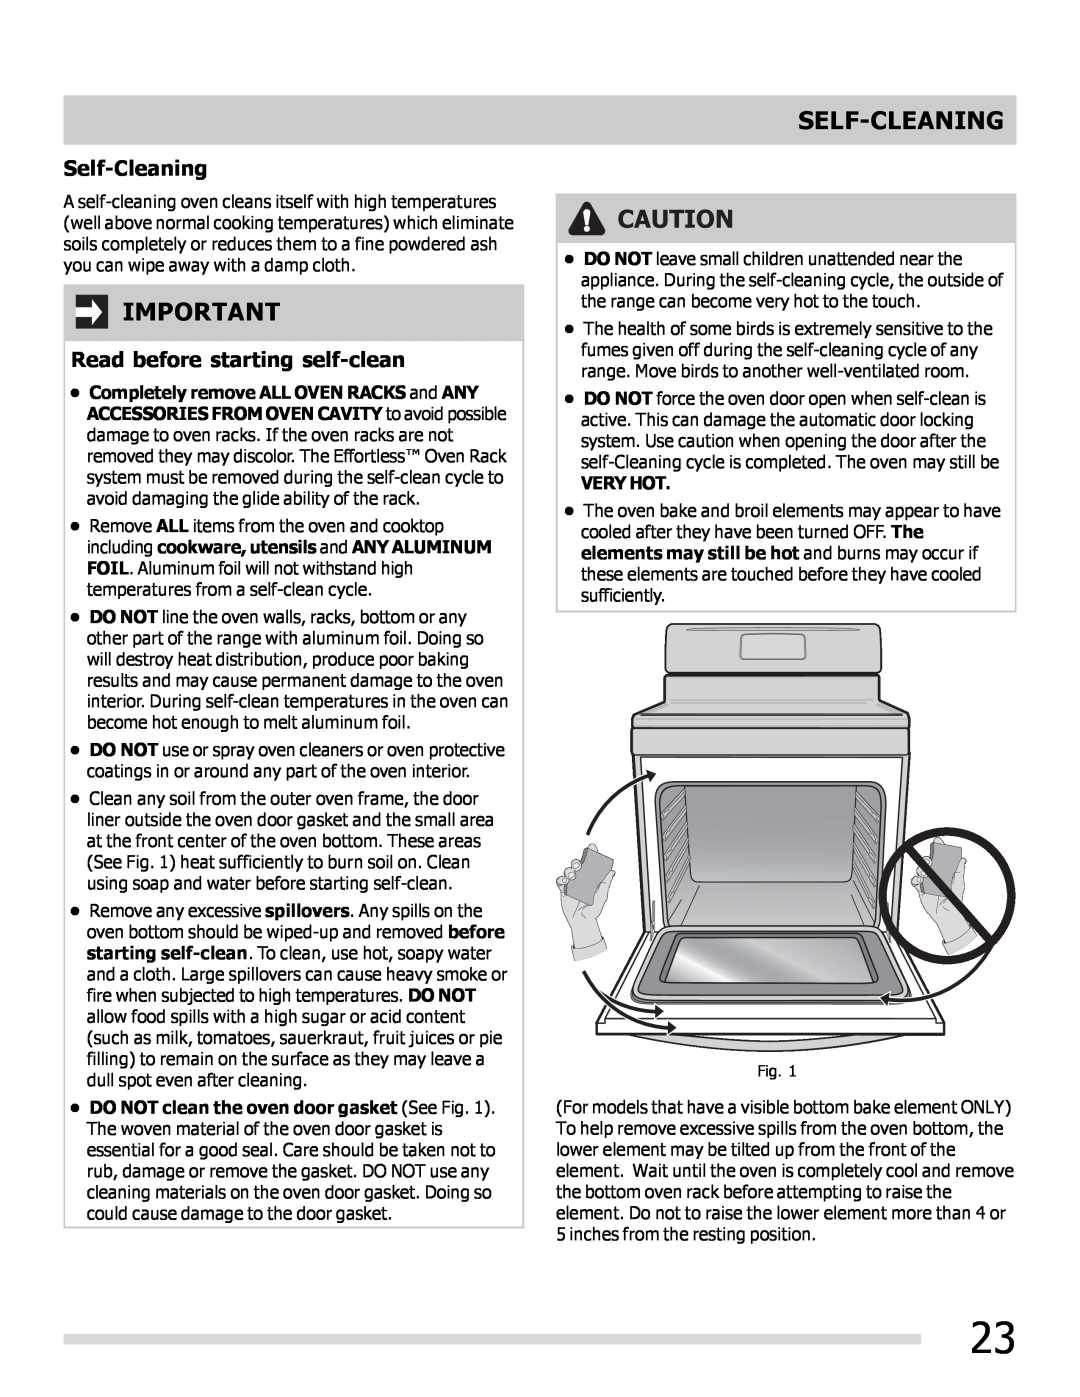 Frigidaire FGEF3030PF important safety instructions Self-Cleaning, Read before starting self-clean 